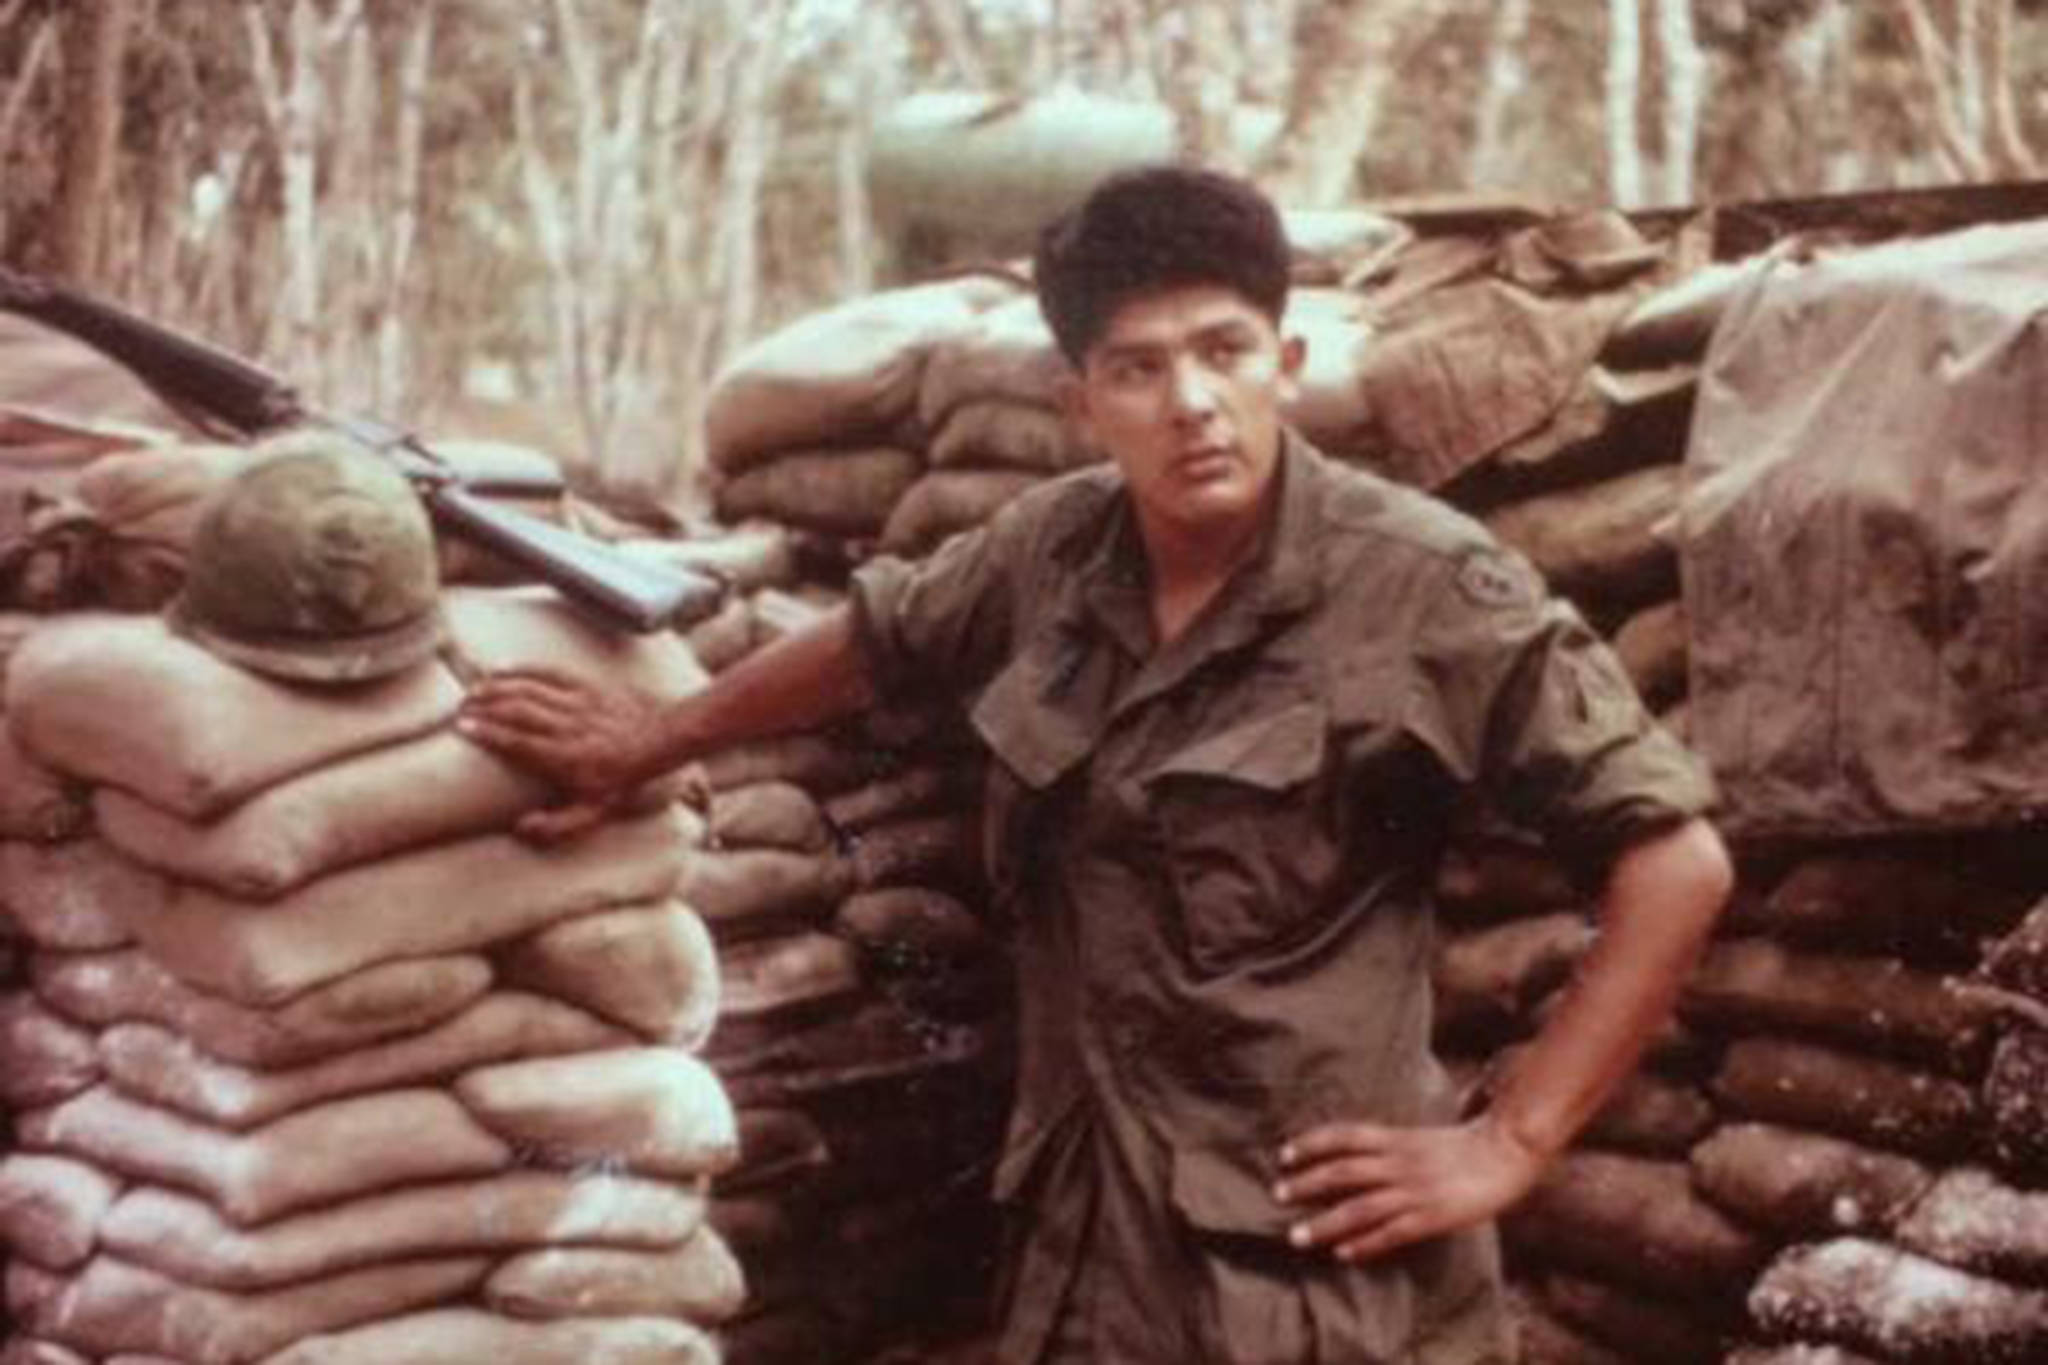 This photo shows George Bennett Sr. shortly after arriving in Vietnam in 1967. Bennett served in the 2/12th Infantry 3rd Brigade, 25th Infantry Division and was assigned to Dau Tieng Base Camp. (Courtesy Photo)